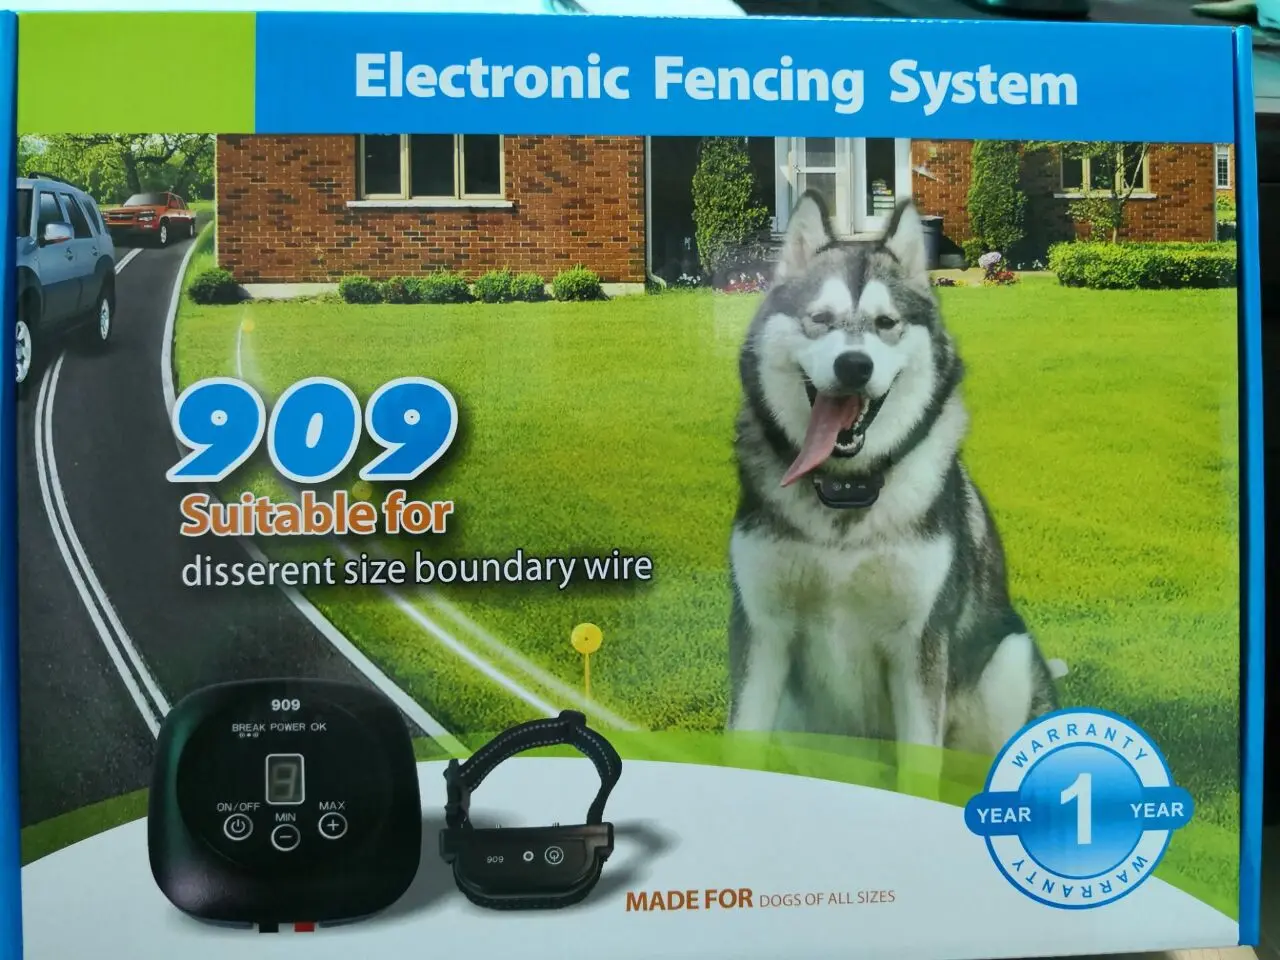 Pet Dog Electric Fence With Waterproof Dog Electronic Training Collar underground Buried Electric Dog Fence Safety System 909